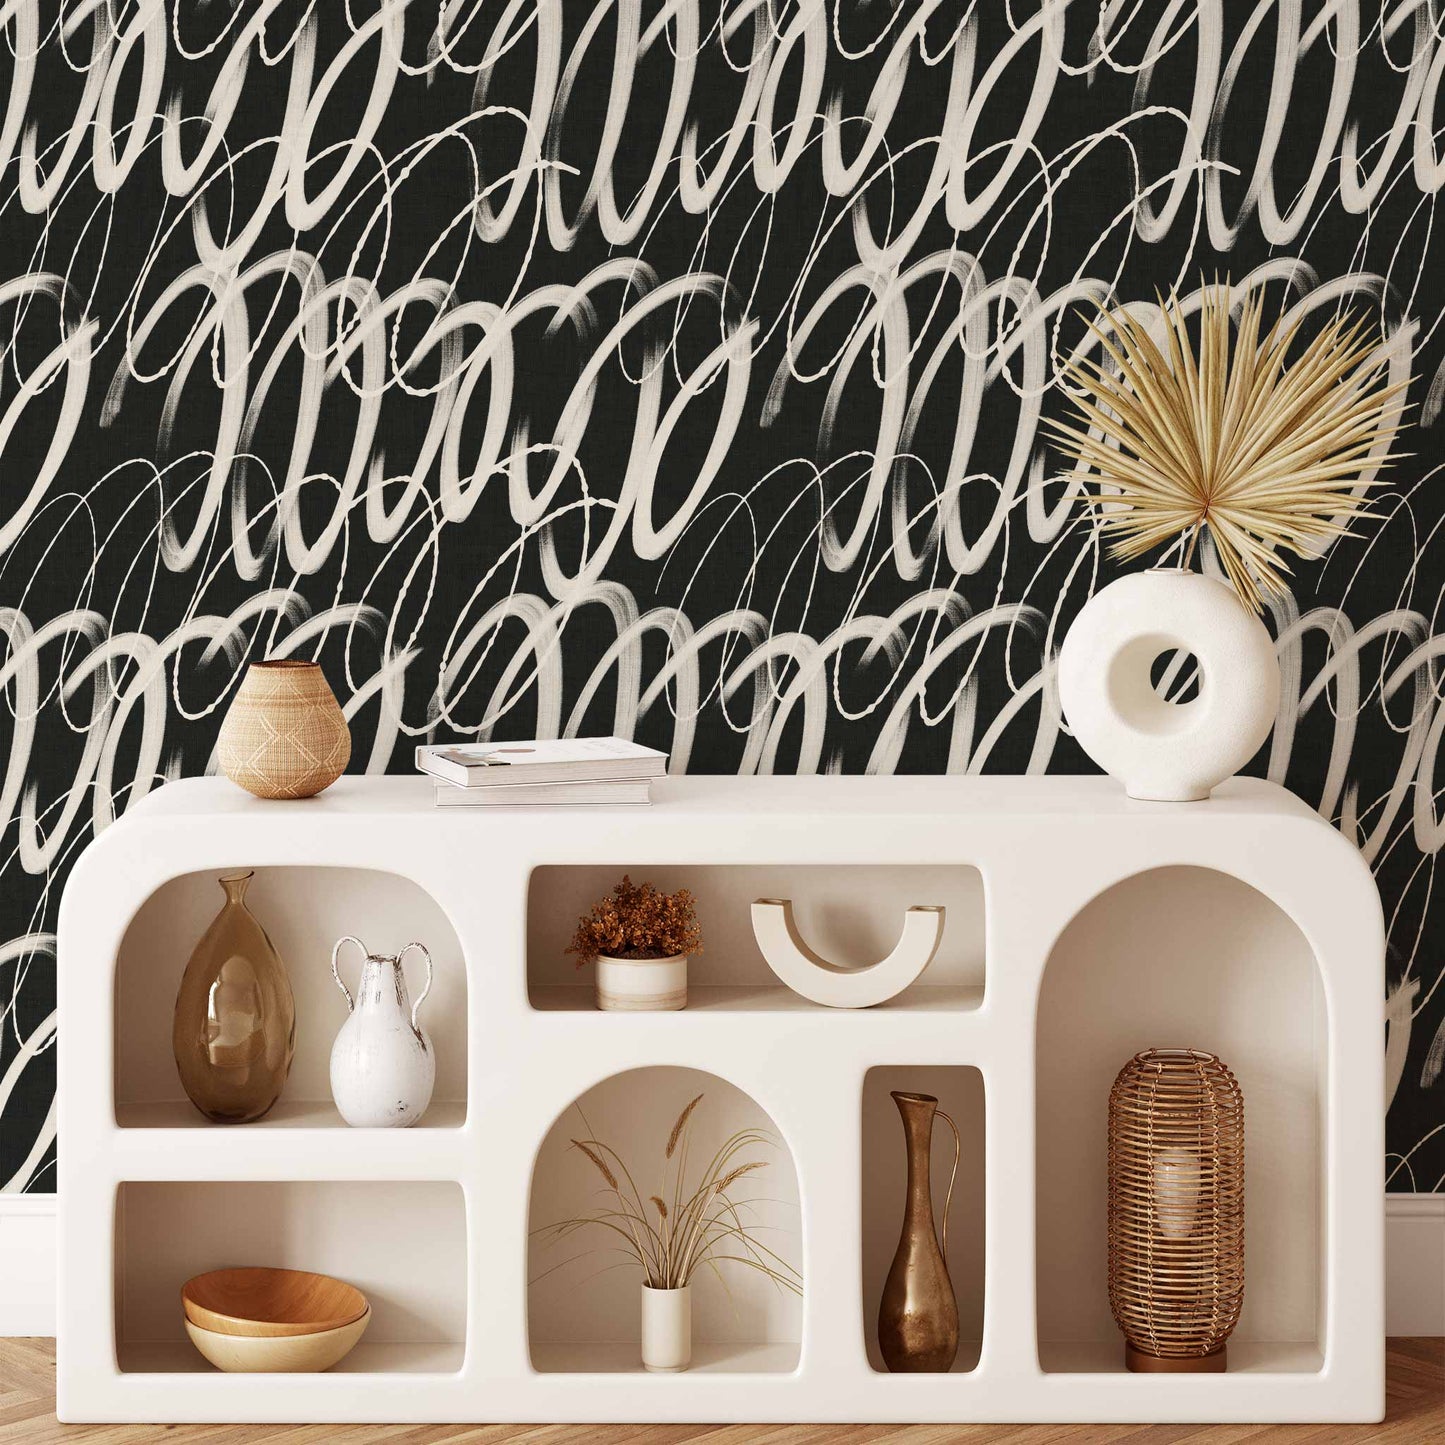 Bring a touch of subtle sophistication to any masculine space with this Mixed Squiggle Wallpaper. Featuring modern elements and geometric shapes, this wallpaper adds an elegant, tasteful ambiance to its surrounds, creating a truly exclusive atmosphere.